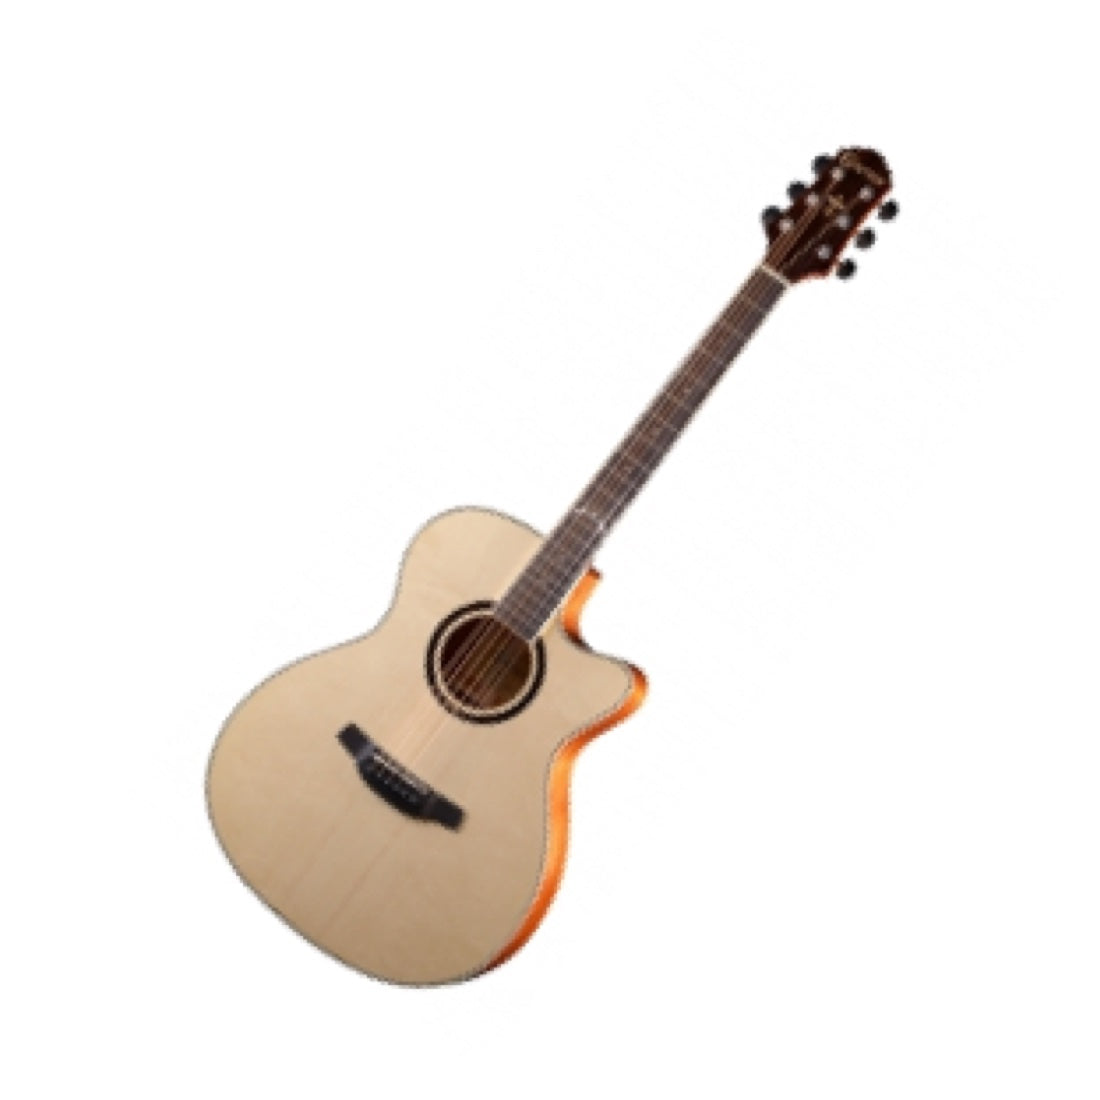 CRAFTER HT-600CE - Musiclandshop